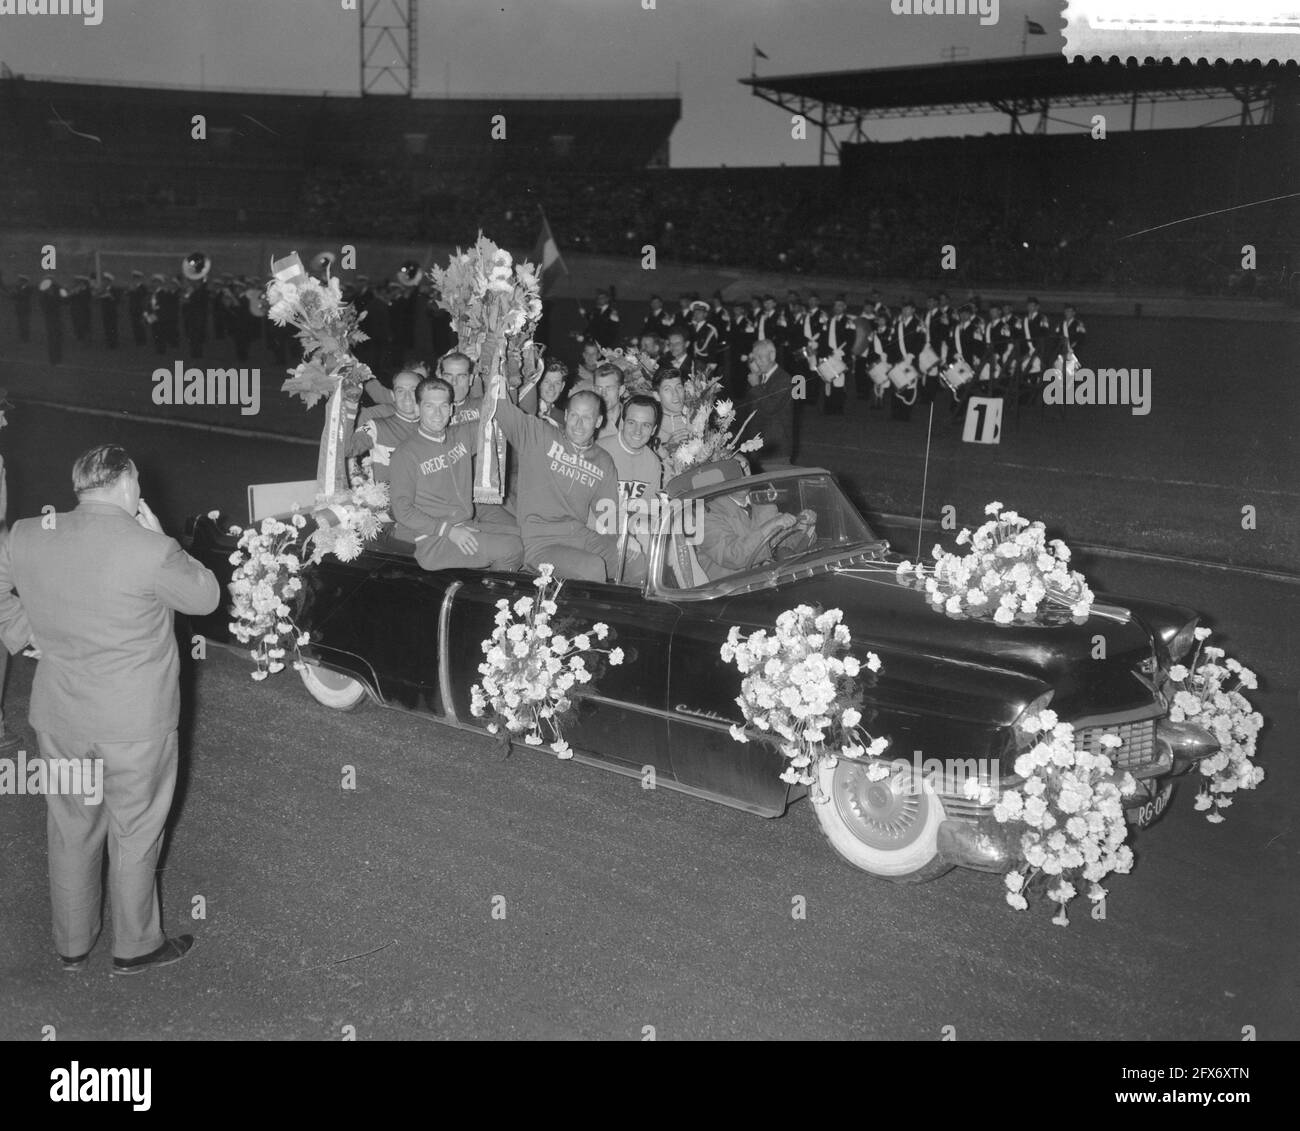 Honoring winners at the World Championships in the Olympic Stadium, from left to right Timoner, Romijn, Koch, Burs, Derksen, Nijdam, Maspes, De Lettre, August 15, 1960, Winners, honors, World Championships, The Netherlands, 20th century press agency photo, news to remember, documentary, historic photography 1945-1990, visual stories, human history of the Twentieth Century, capturing moments in time Stock Photo